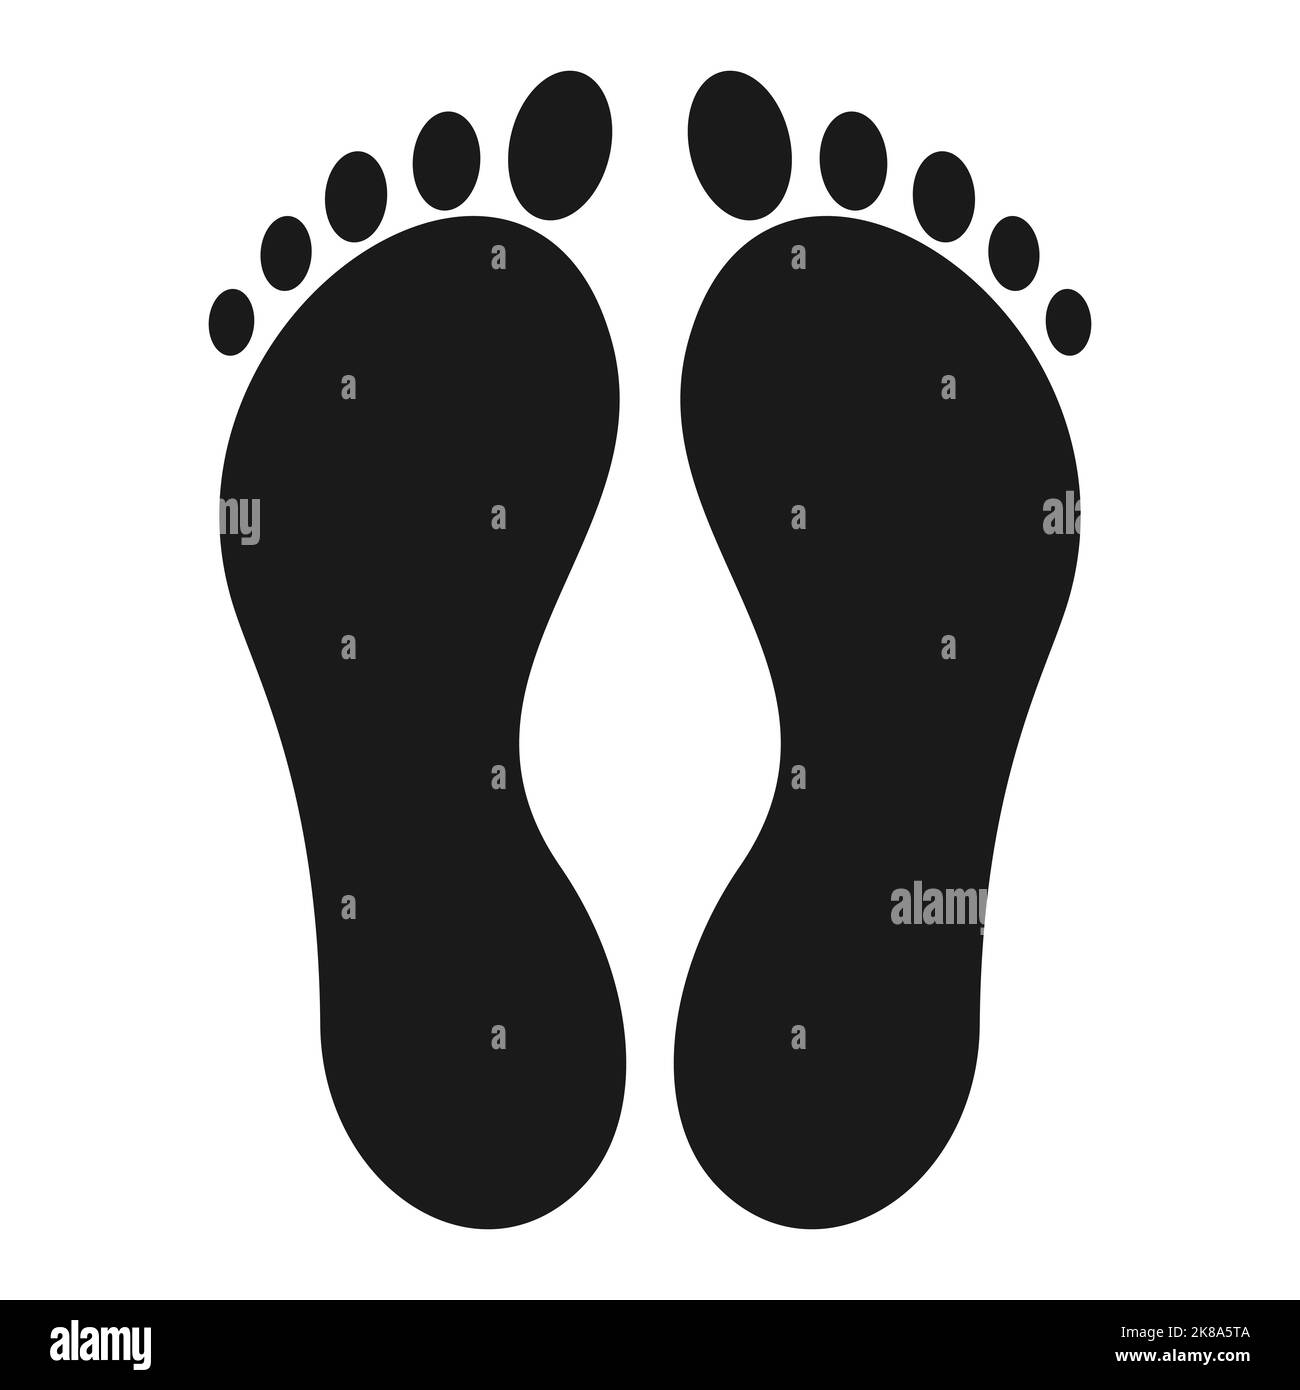 Human footprint. Impression left by a foot on the ground or a surface. Vector illustration. Stock Vector